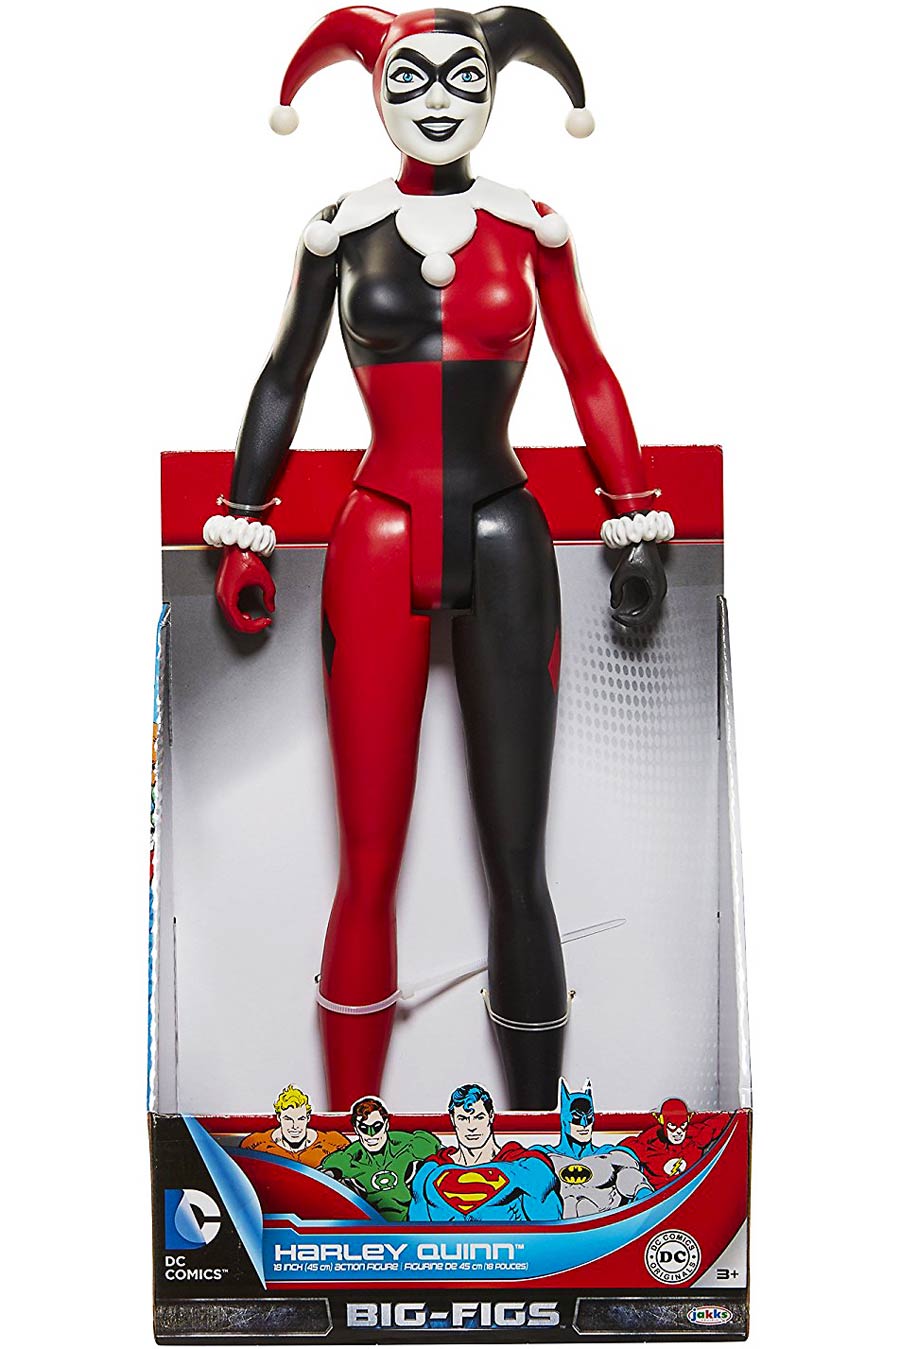 DC Big Figs Harley Quinn 18-Inch Action Figure